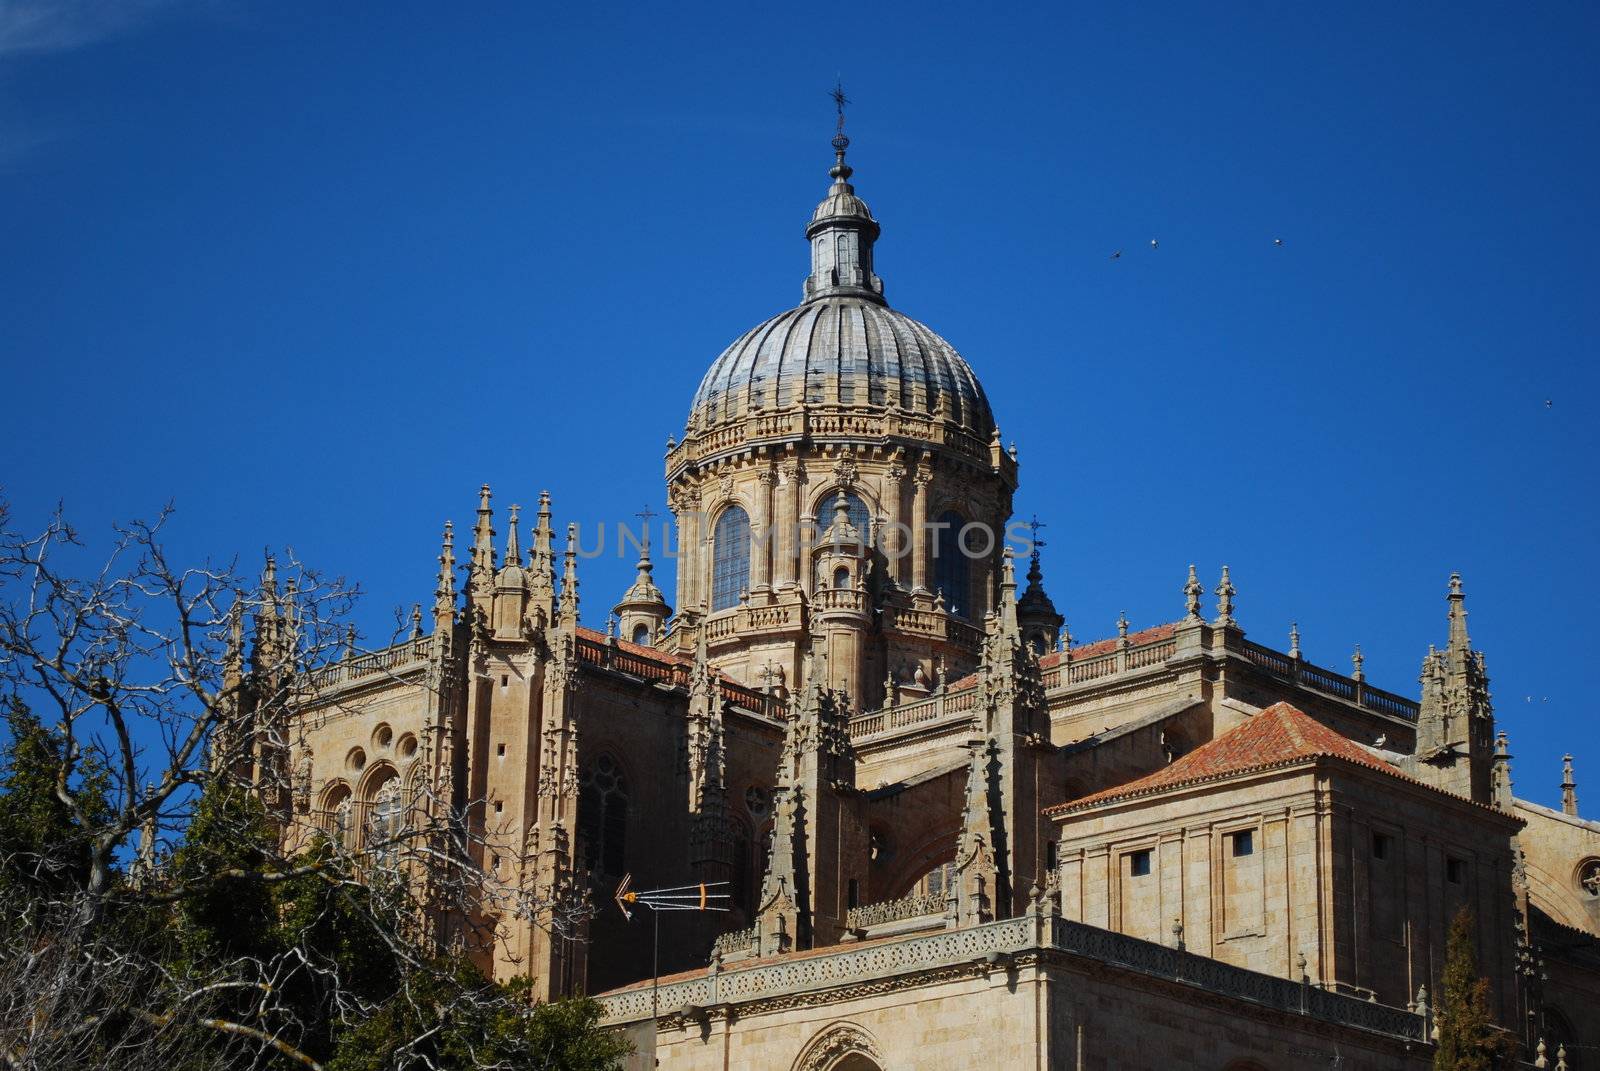 New Cathedral Dome in Salamanca, Spain by luissantos84